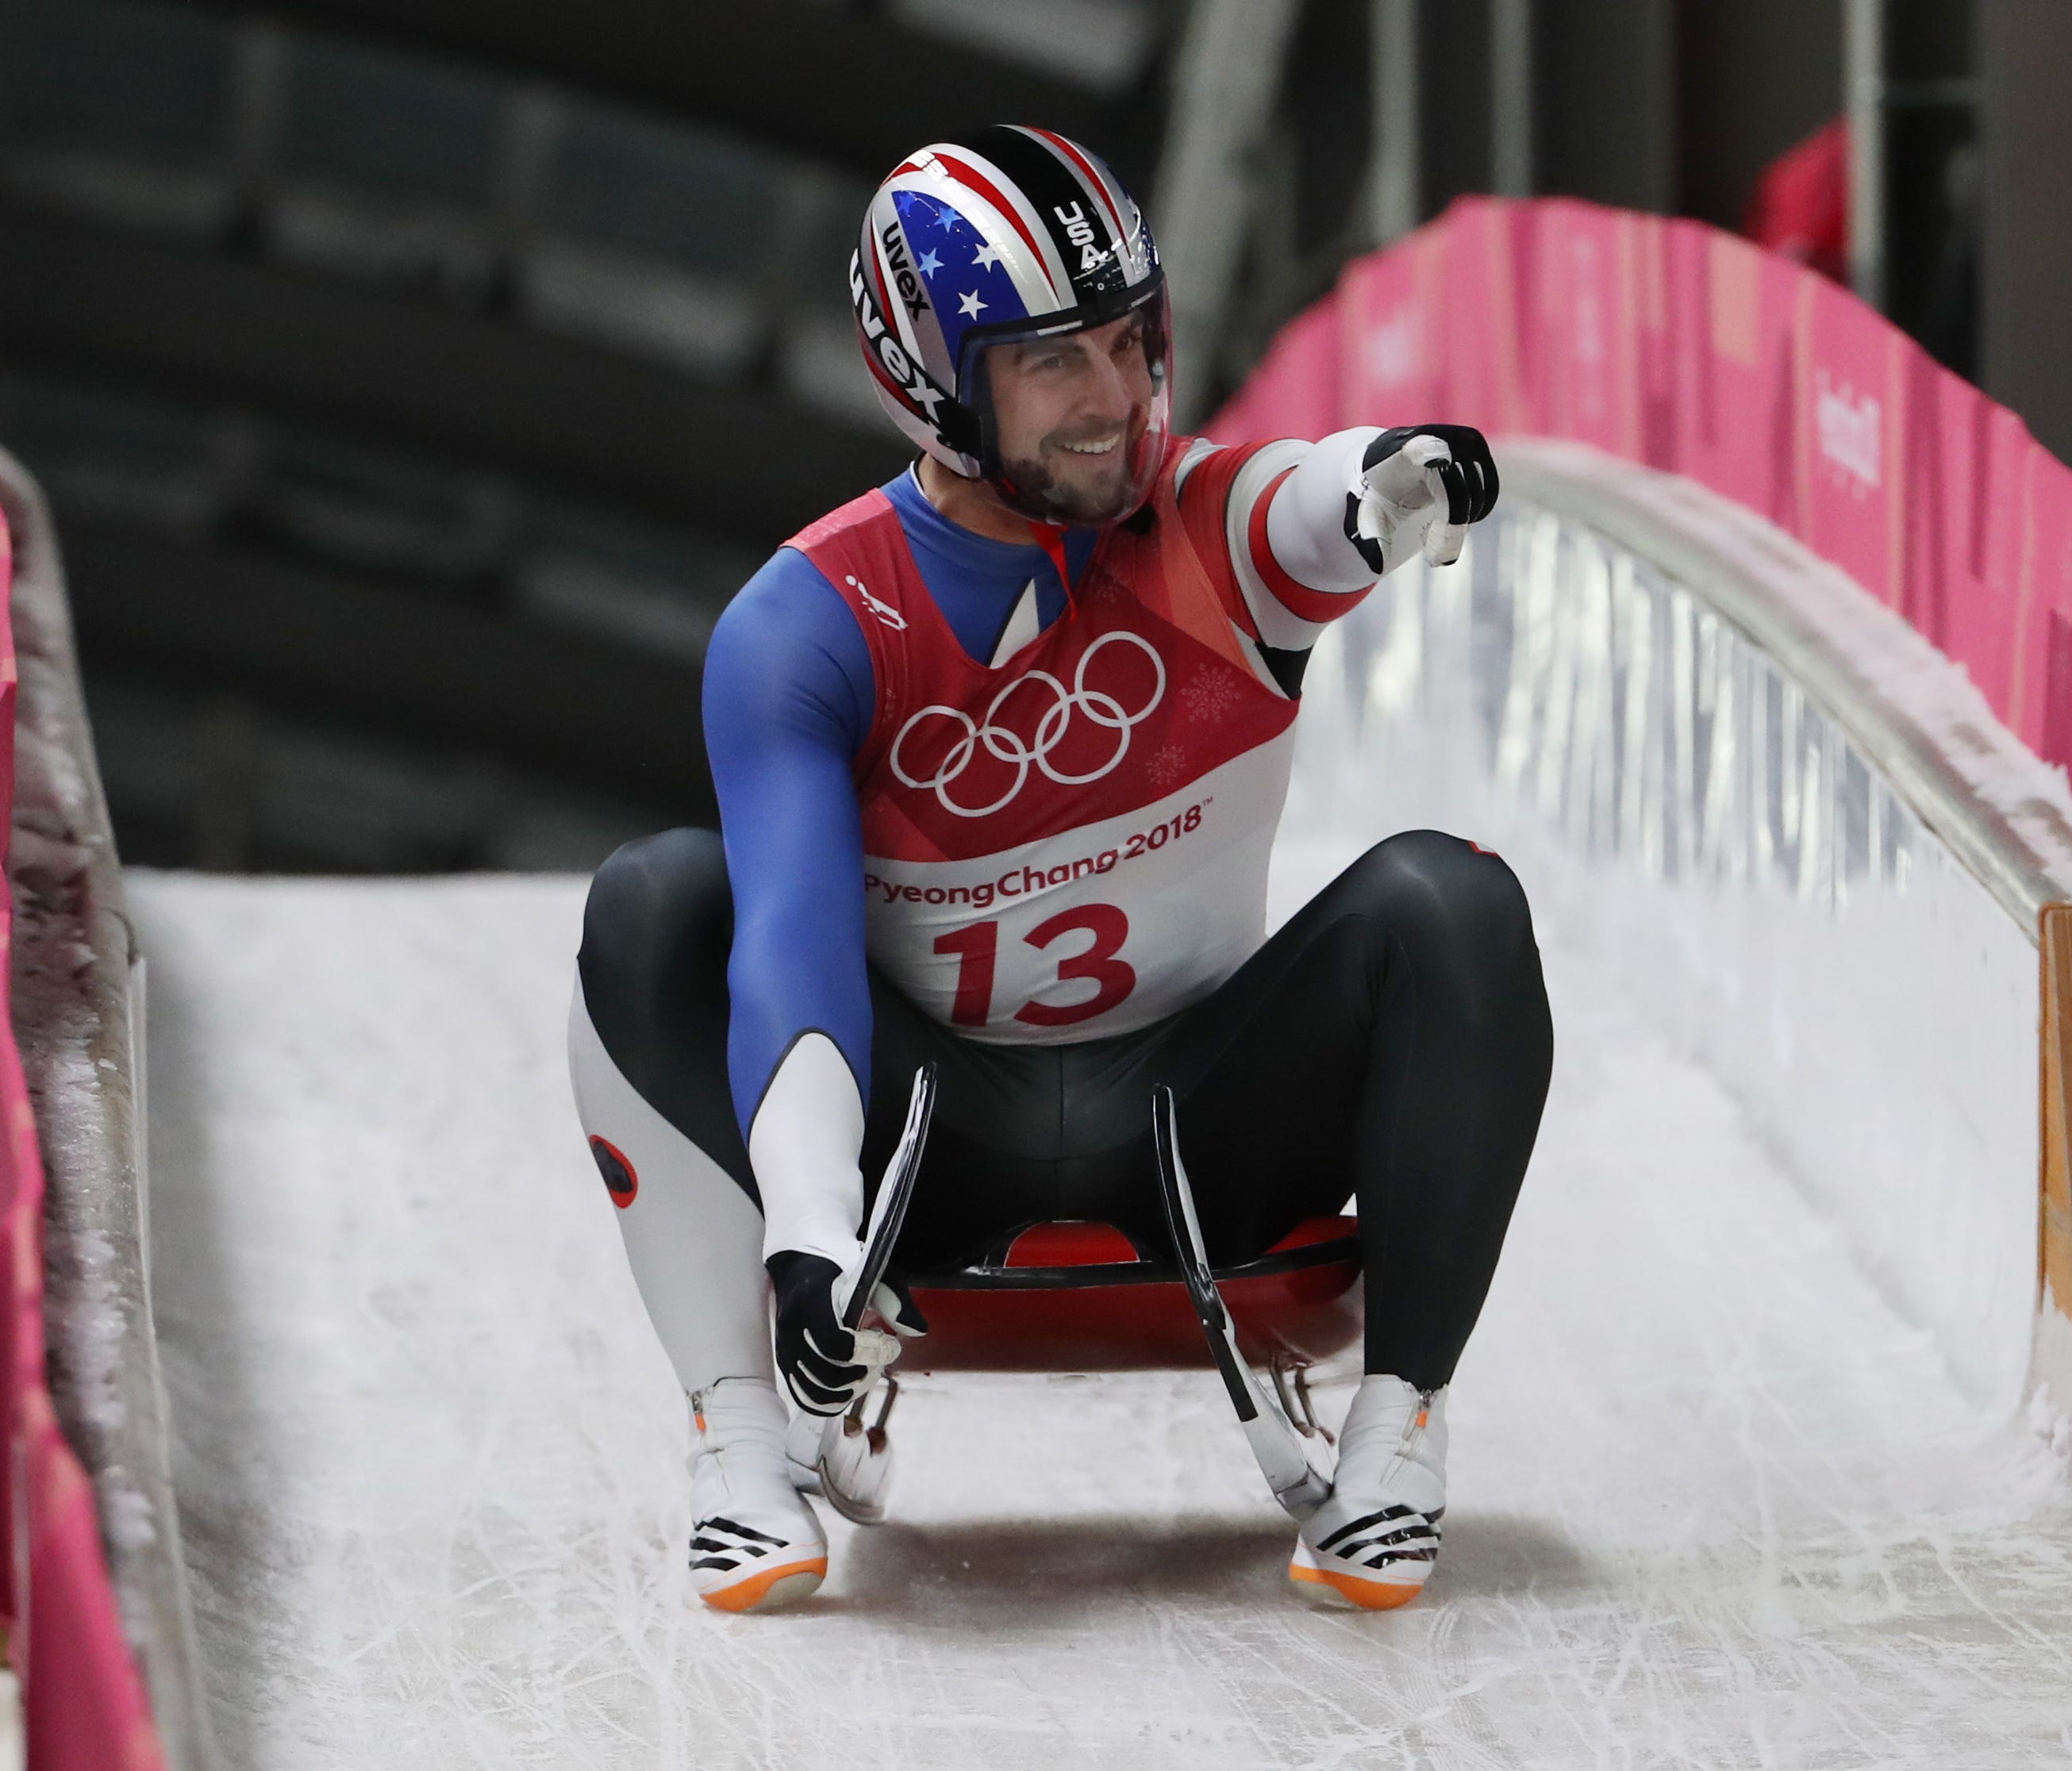 Chris Mazdzer of the USA sets a track record and put himself in silver-medal position with his third luge run on Sunday in the Pyeongchang 2018 Winter Olympics.